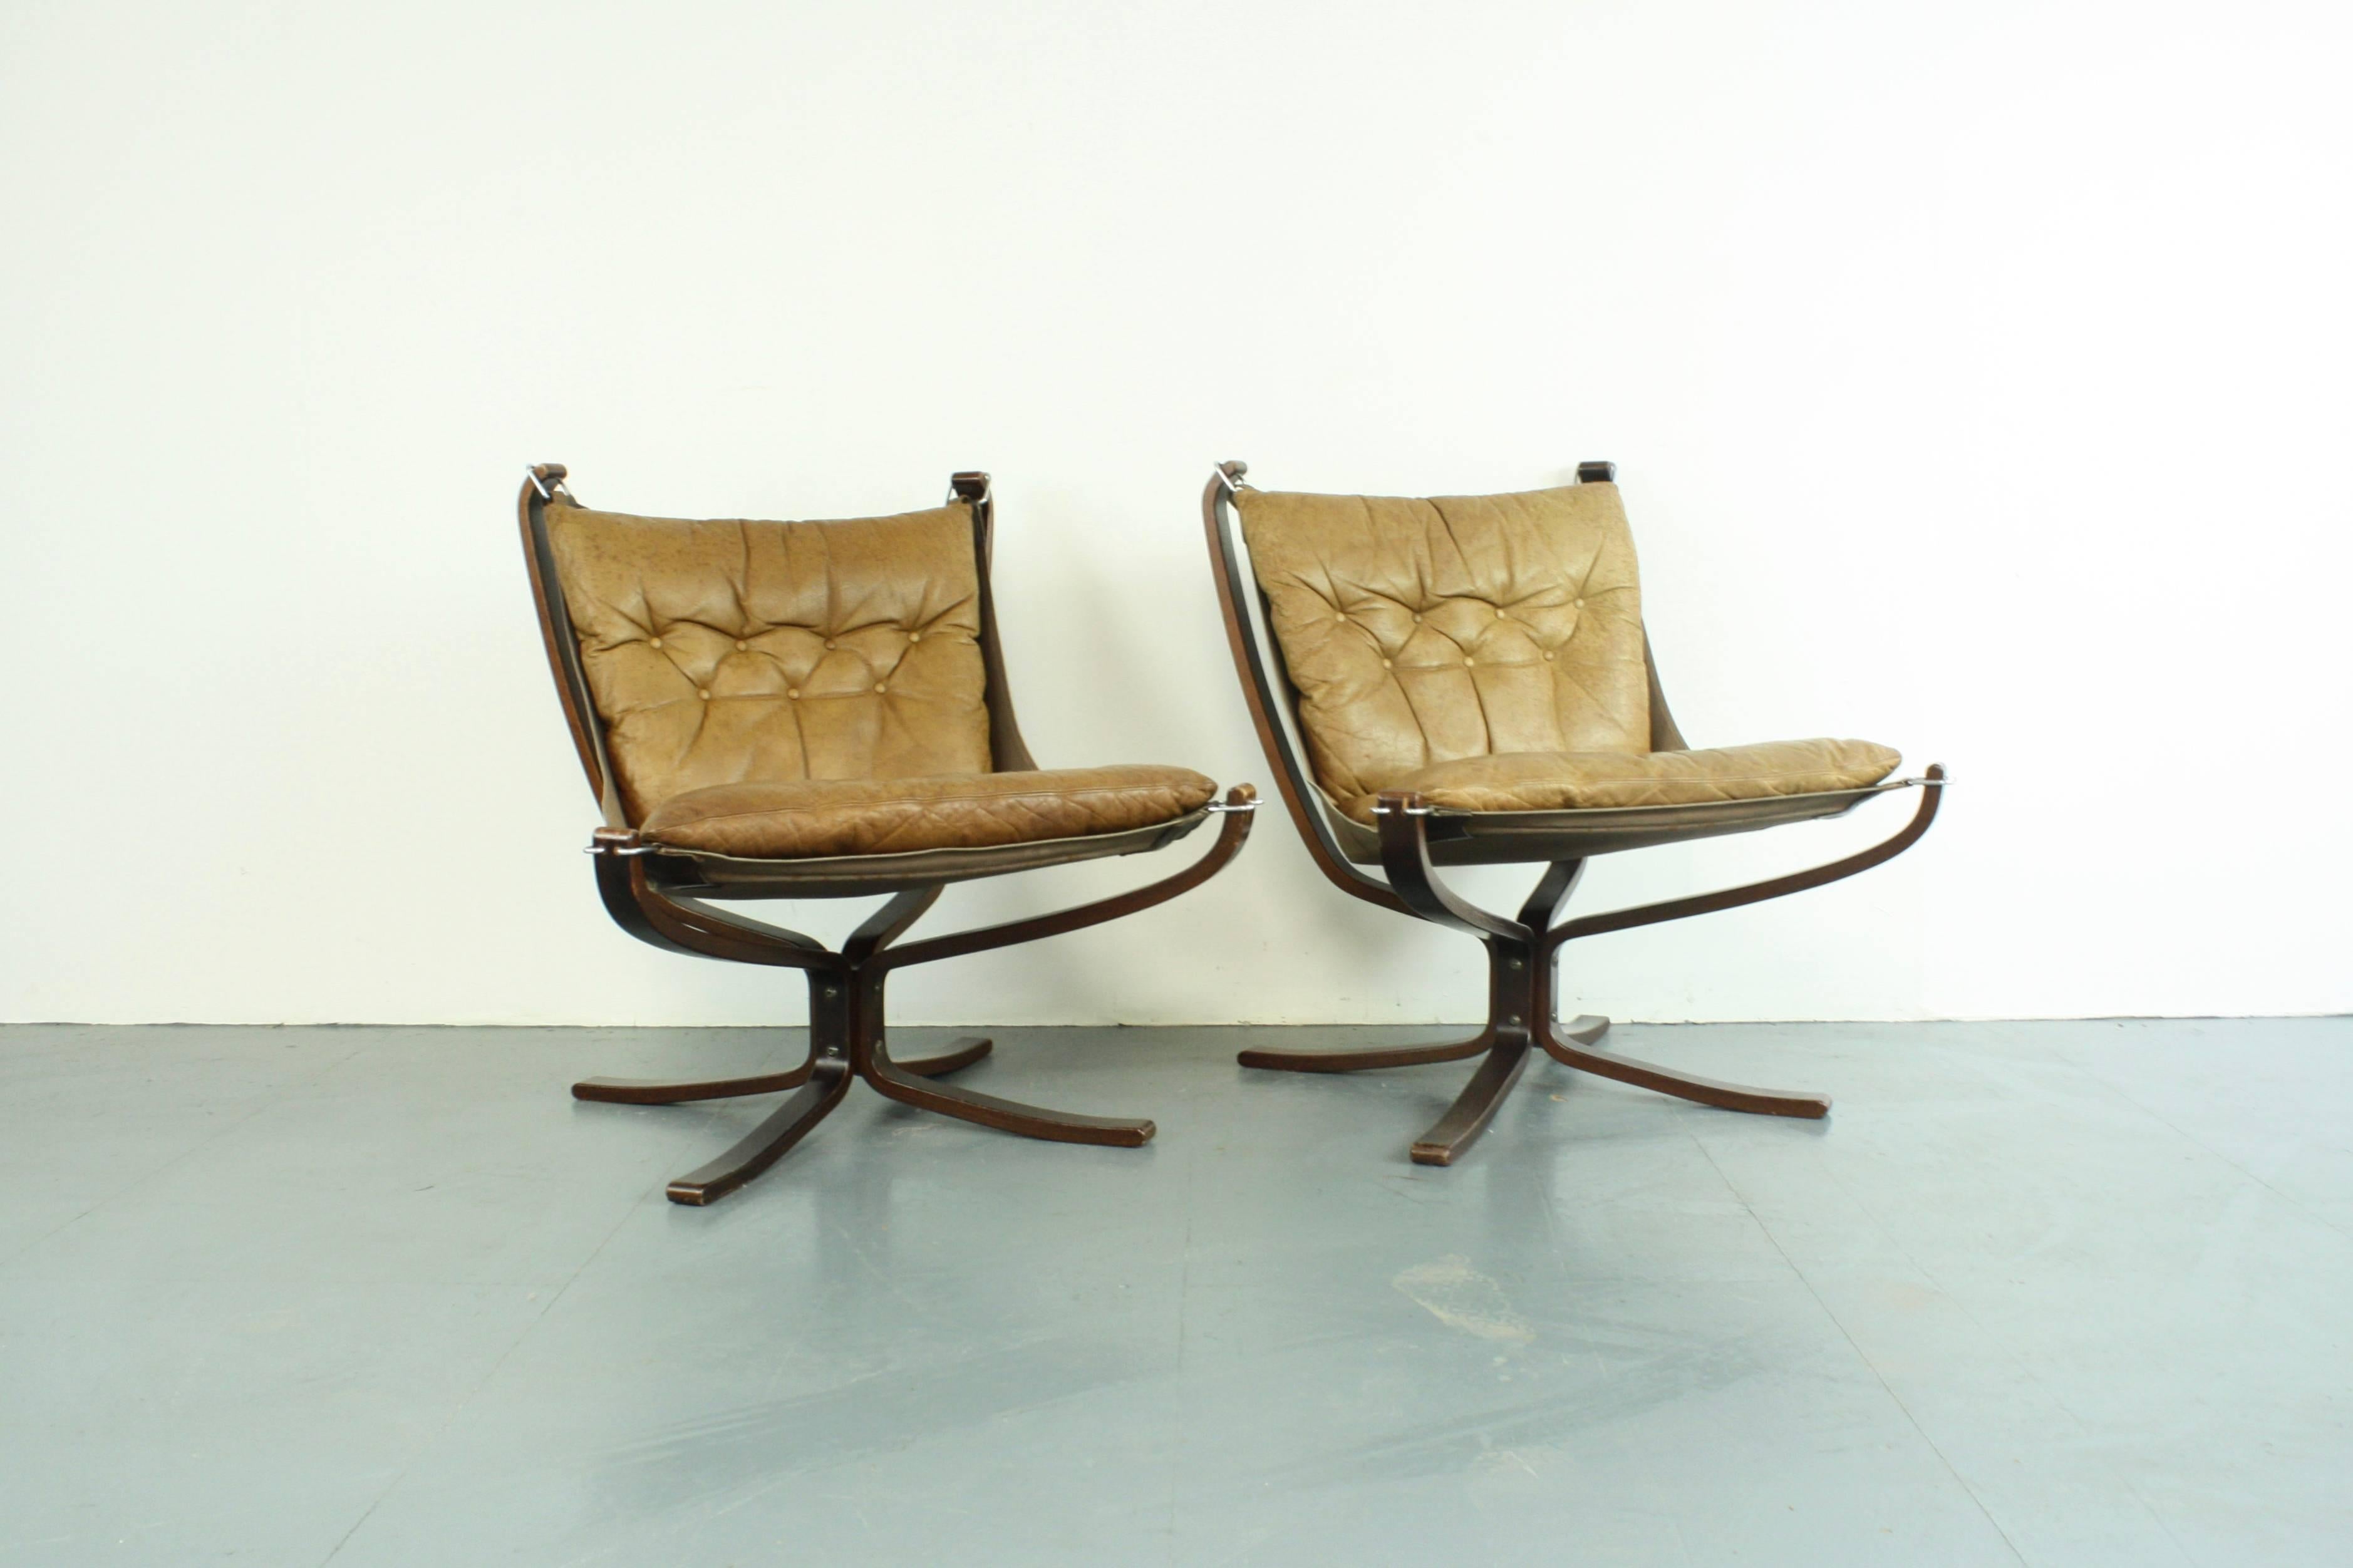 Pair of Vintage Low Back Camel Leather Falcon Chairs Designed by Sigurd Resell In Good Condition For Sale In Lewes, East Sussex